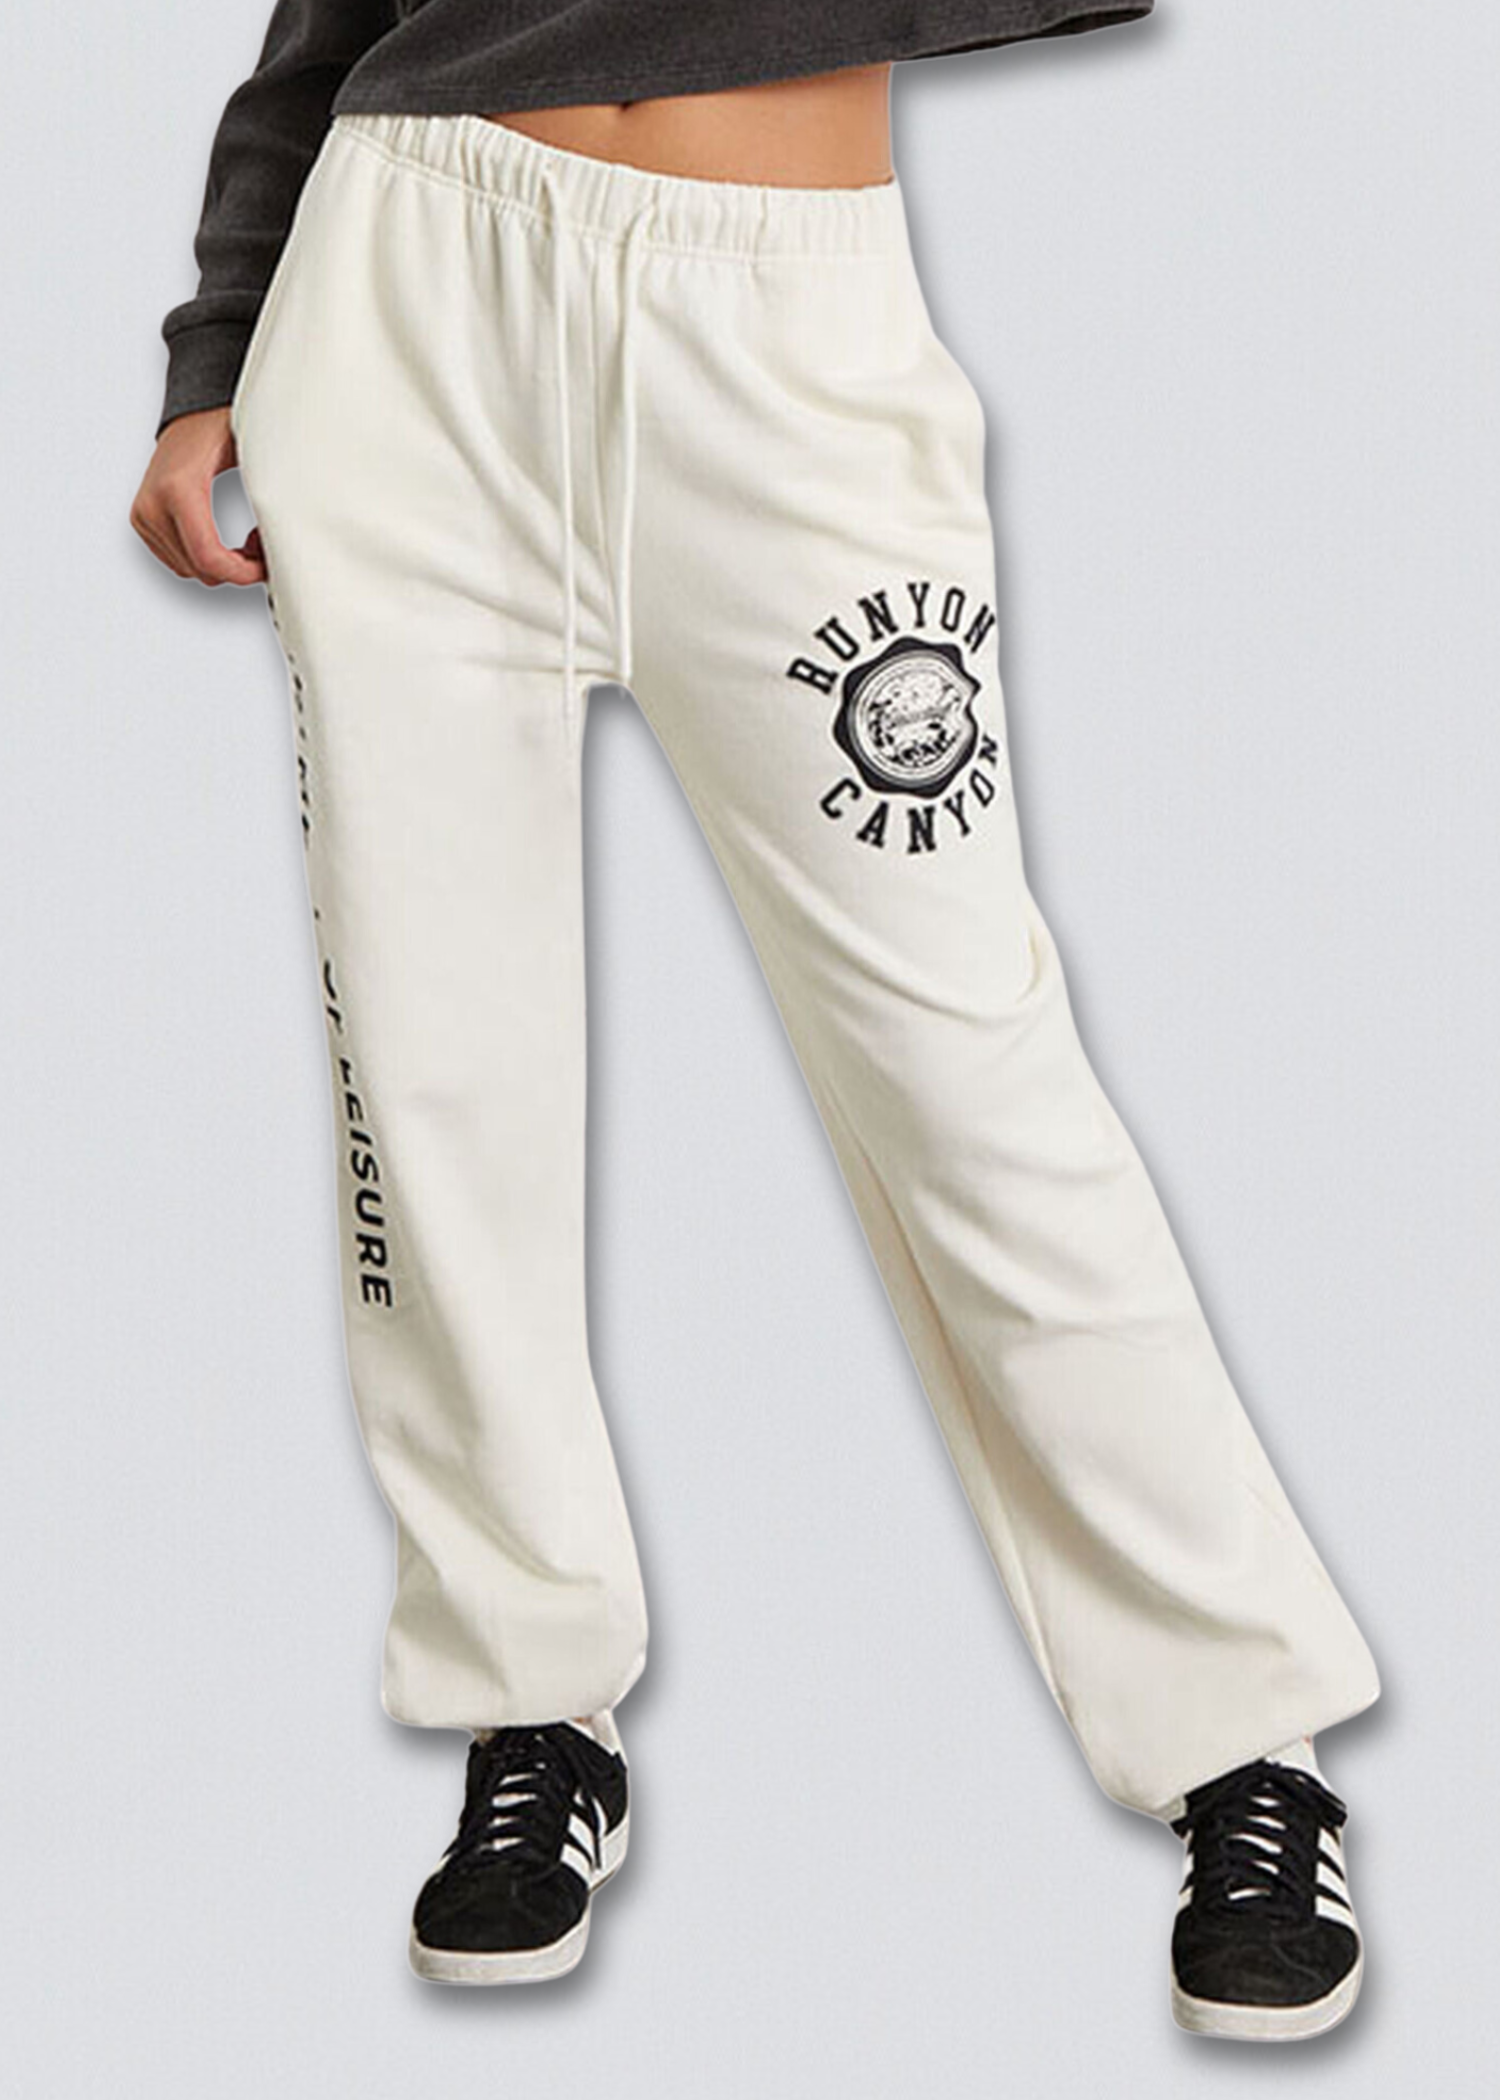 Runyon Canyon Department of Leisure Graphic Sweatpants